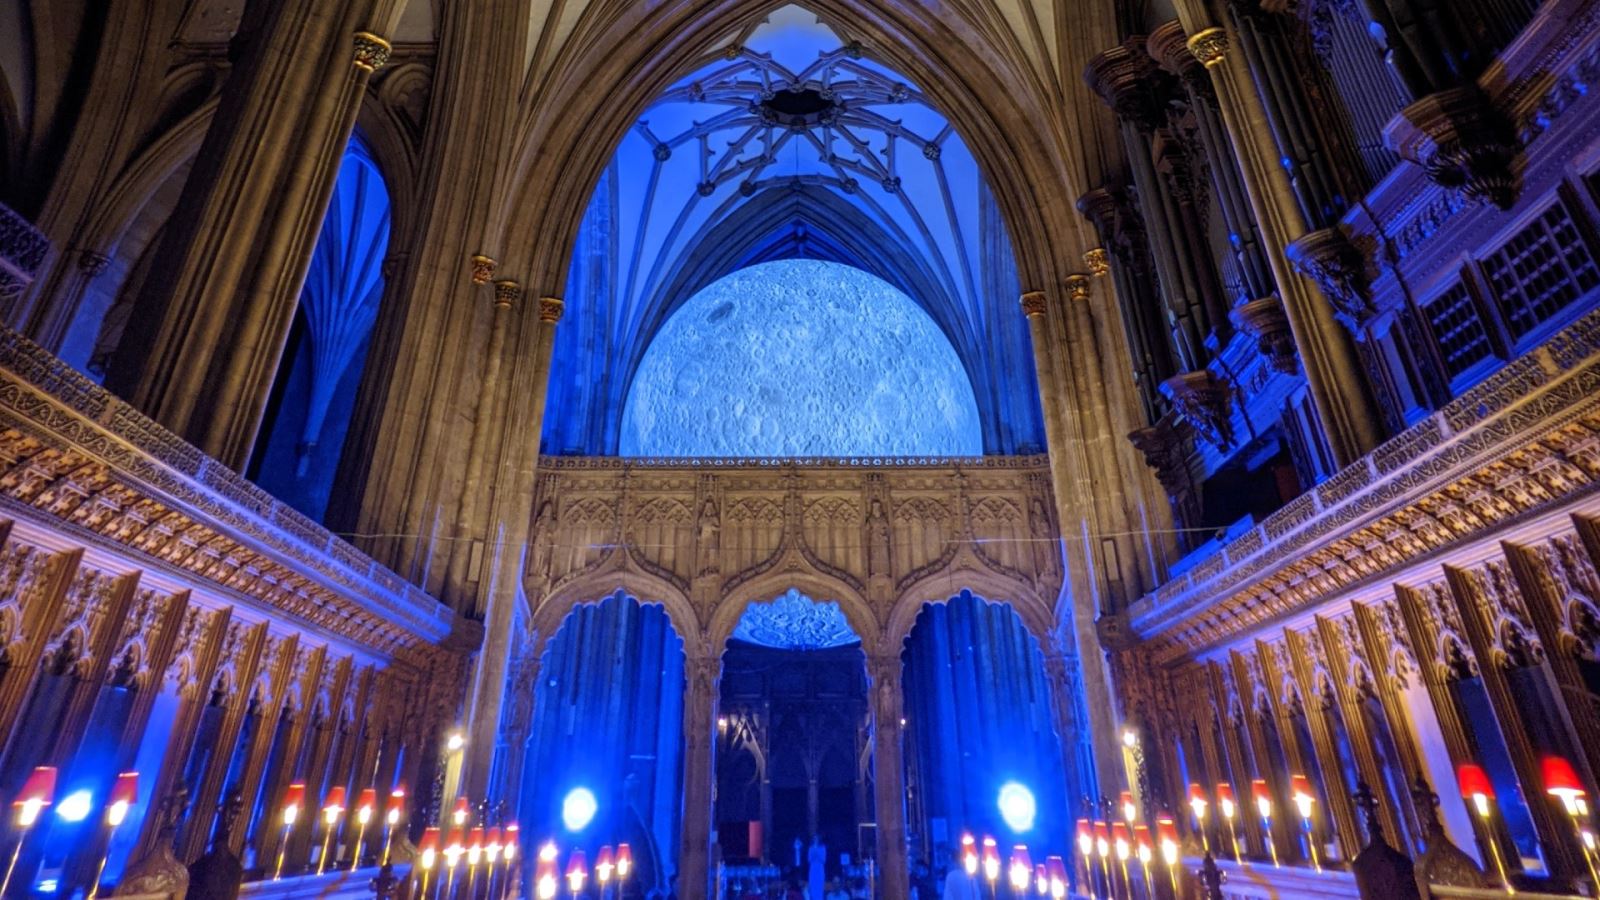 Luke Jerram's Museum of the Moon at Bristol Cathedral